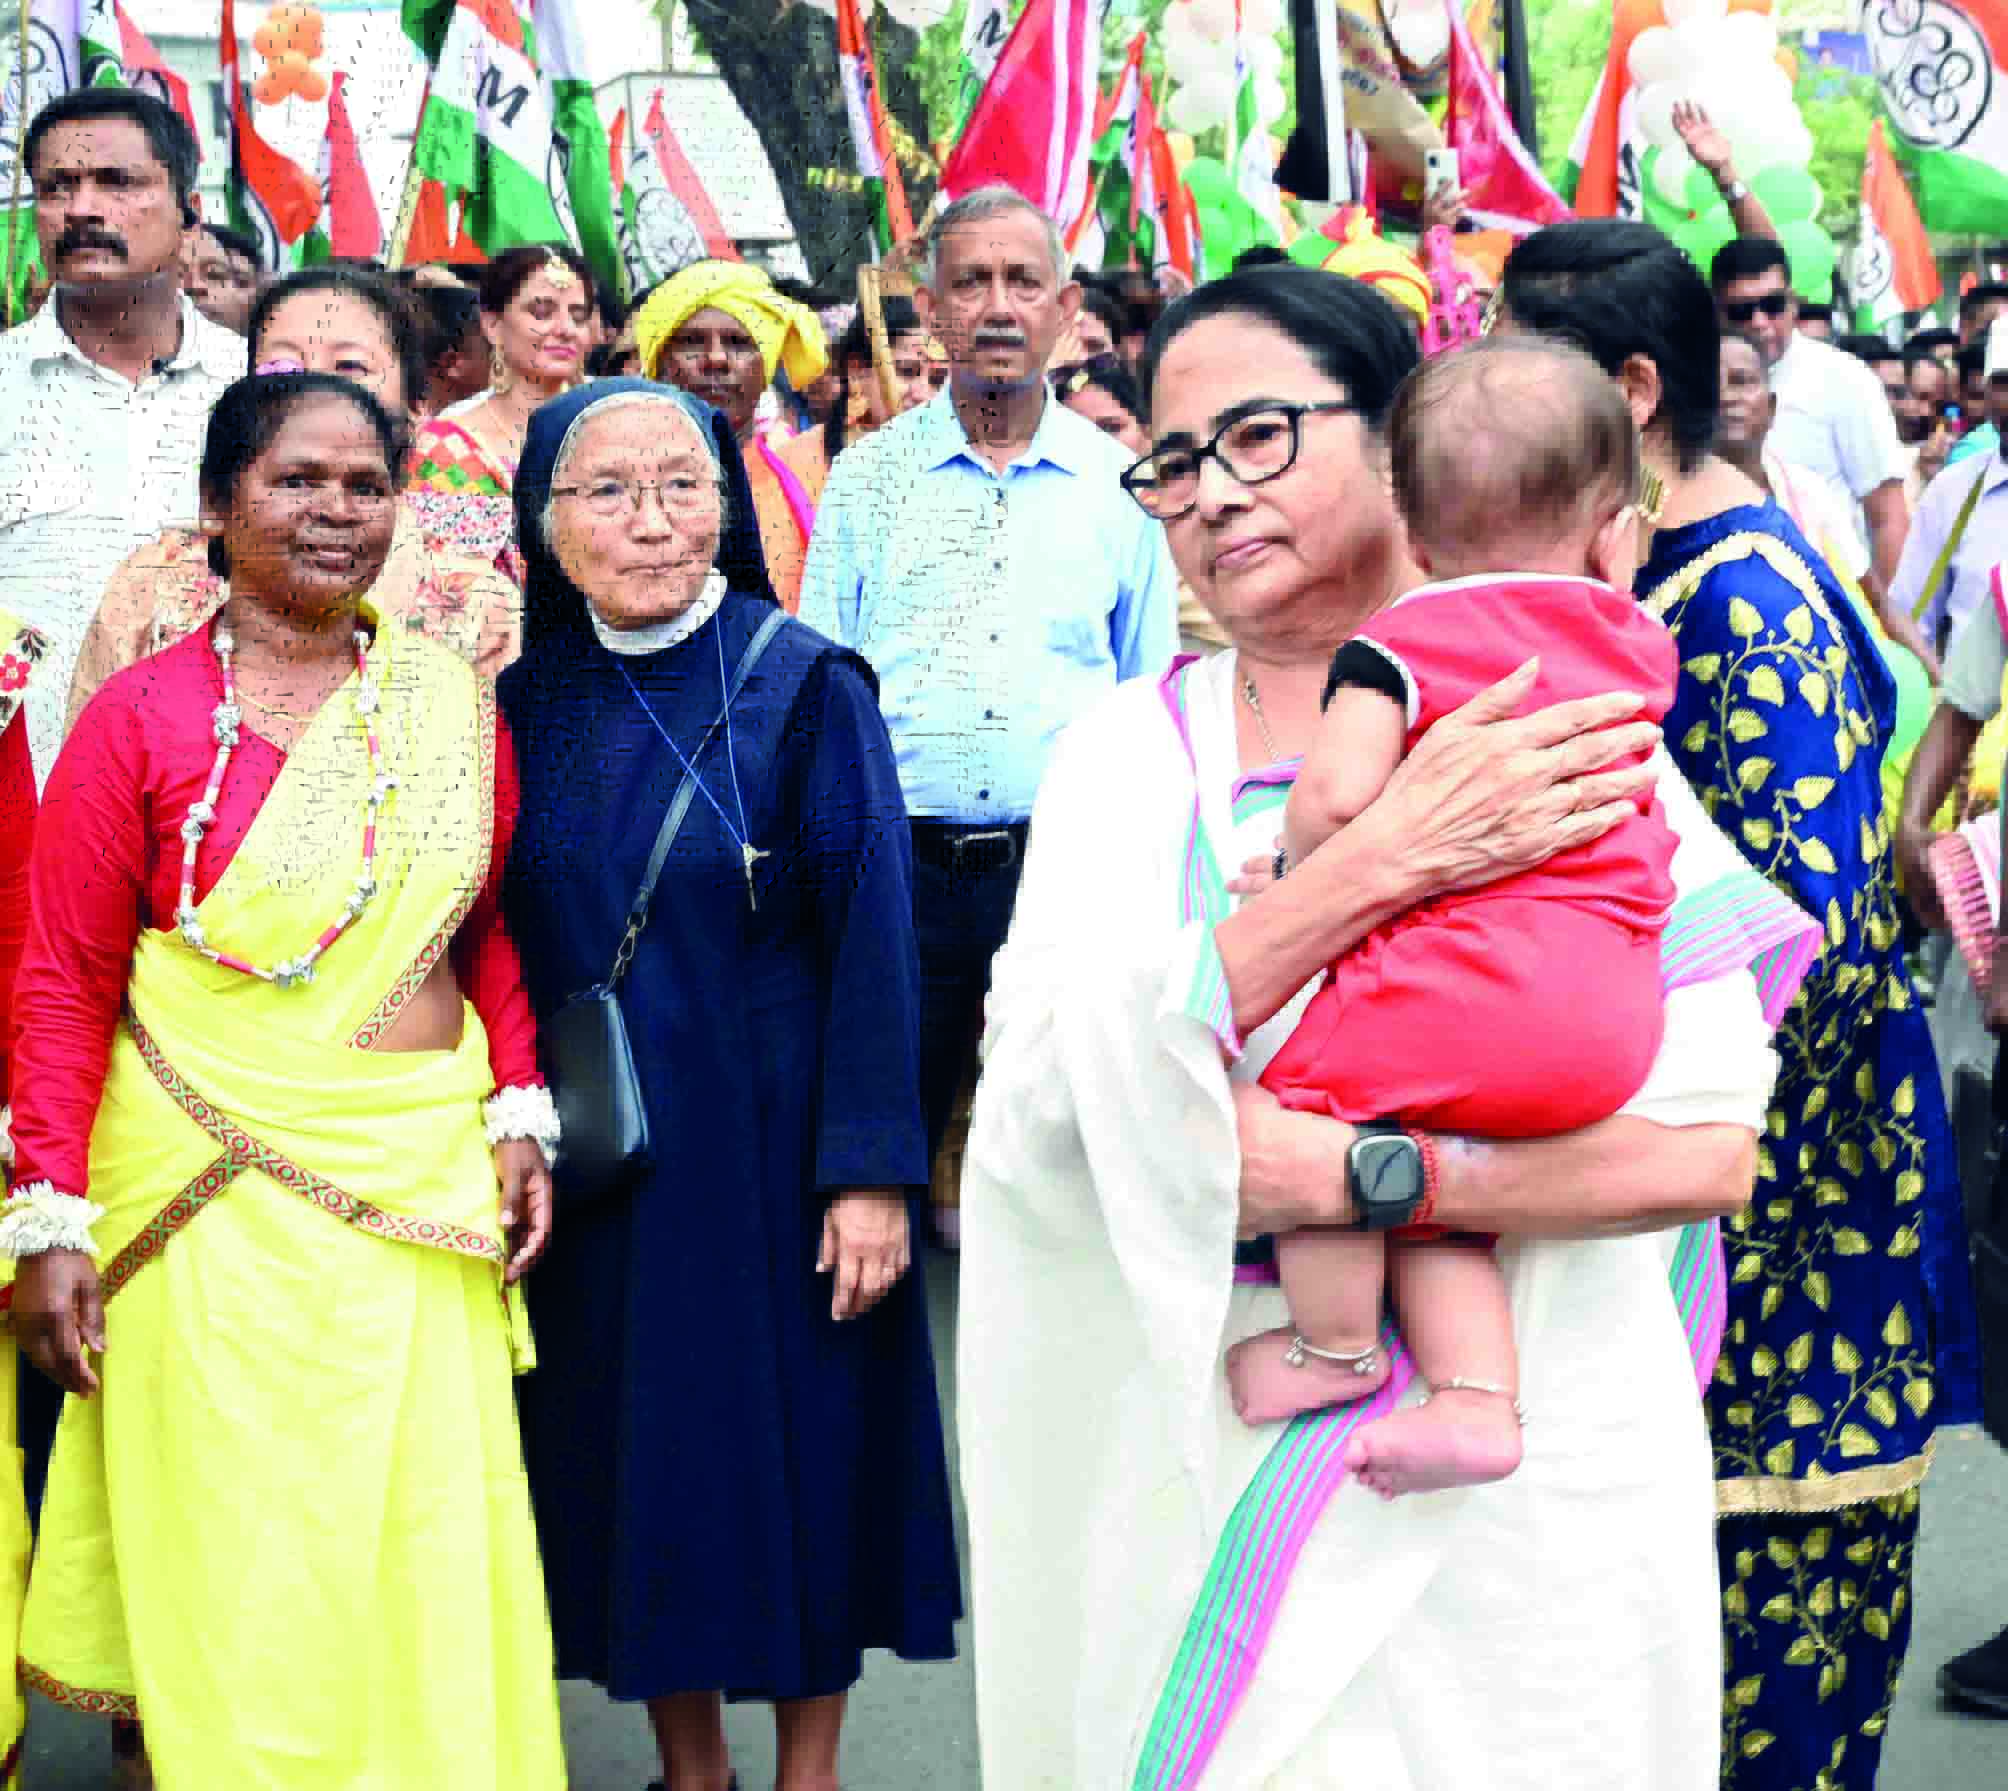 Siliguri: Mamata’s colourful rally in support of party candidate spreads ‘unity in diversity’ message